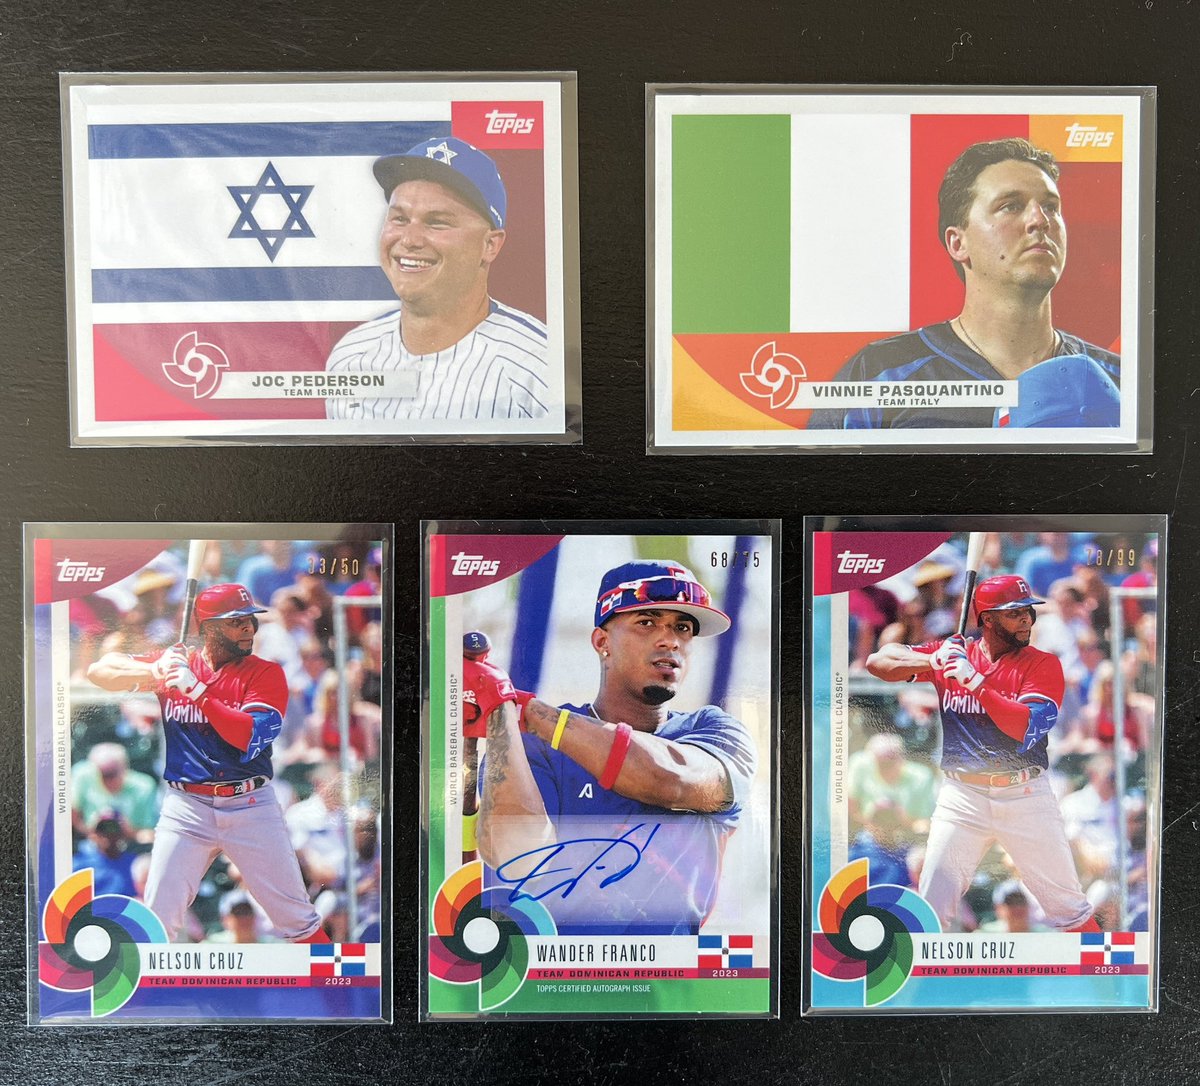 @CardPurchaser here are the 2 parallels + 2 inserts from the world baseball classic box + 1 big autograph!